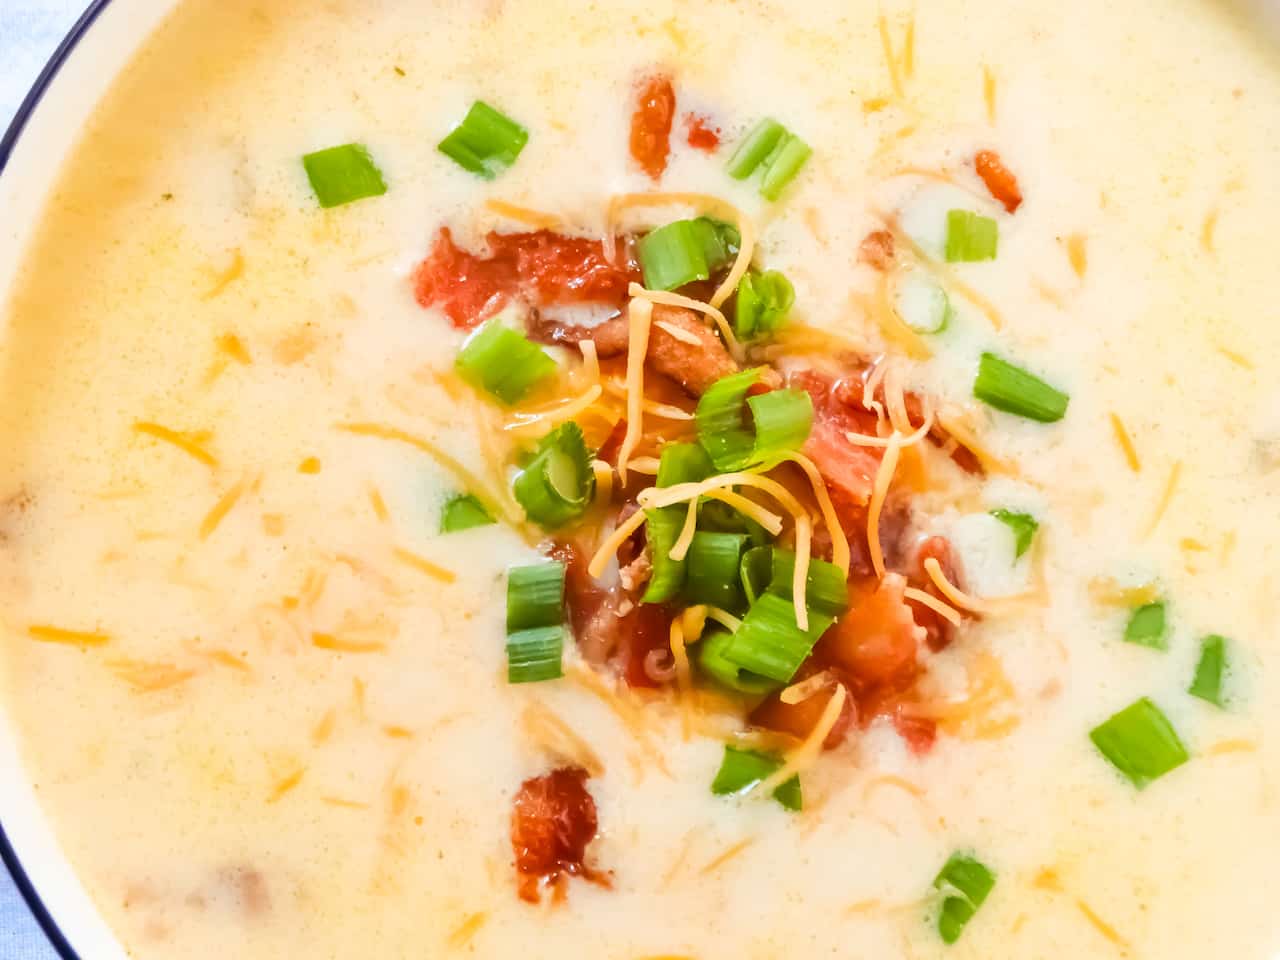 slow cooker loaded potato soup topped with chives, bacon and cheddar cheese